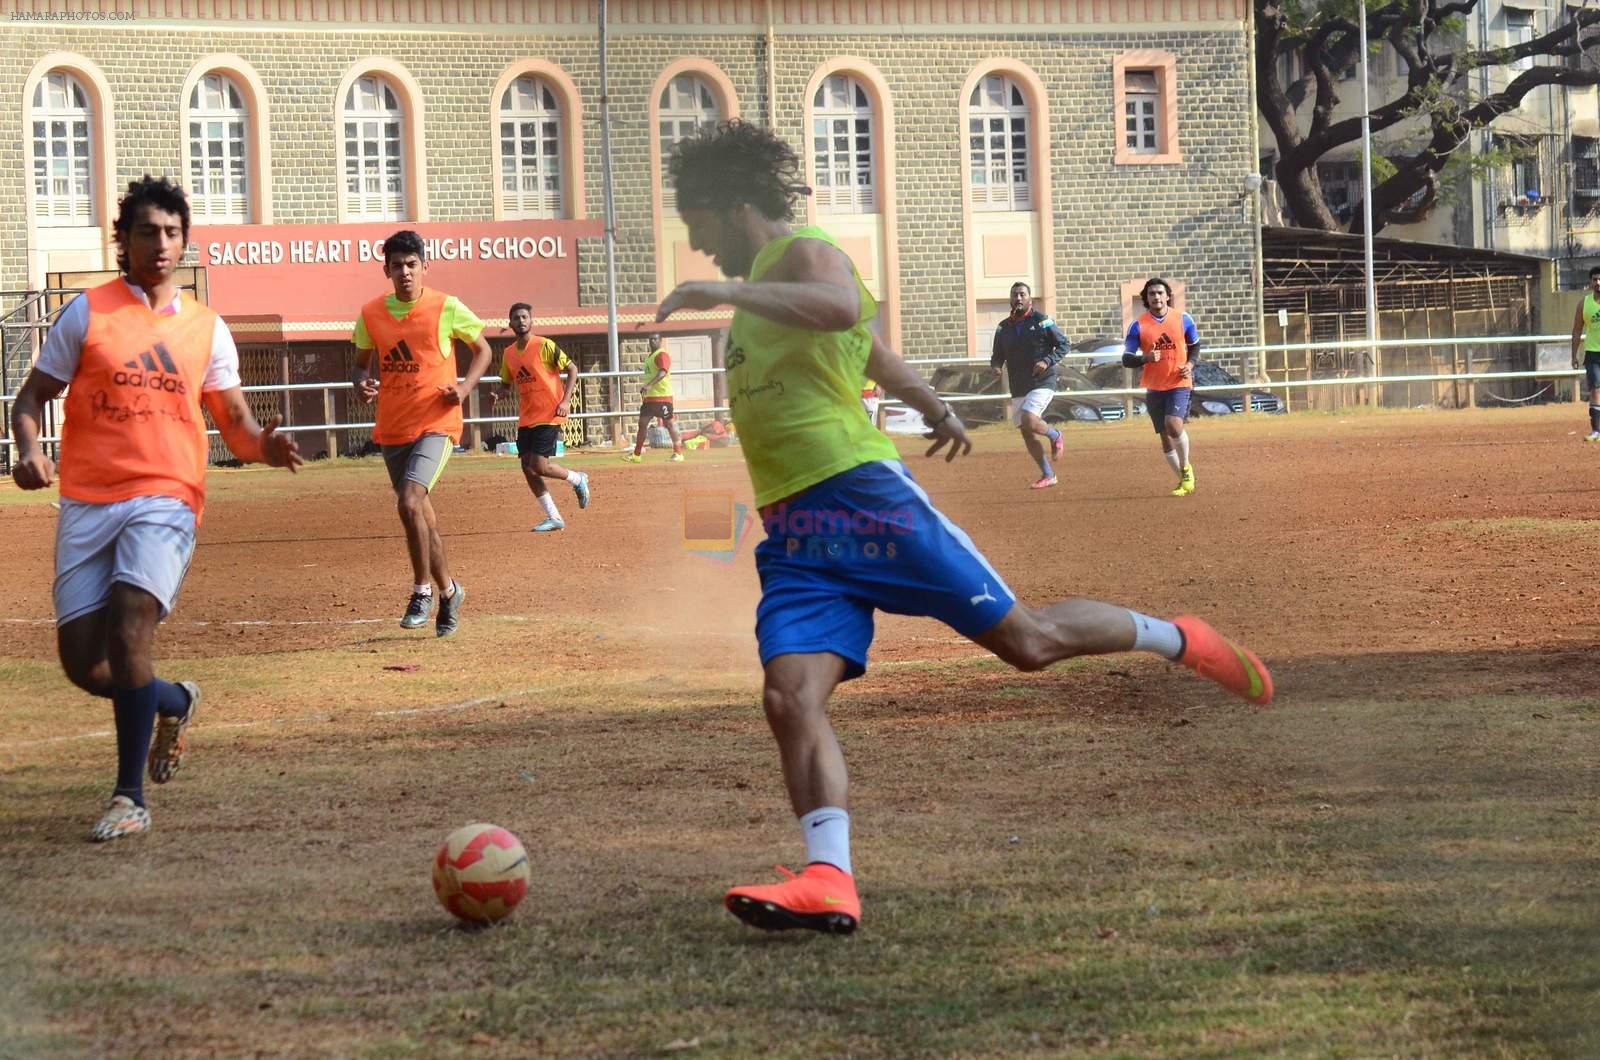 Arjun Kapoor snapped in action at soccer match on 18th Jan 2016